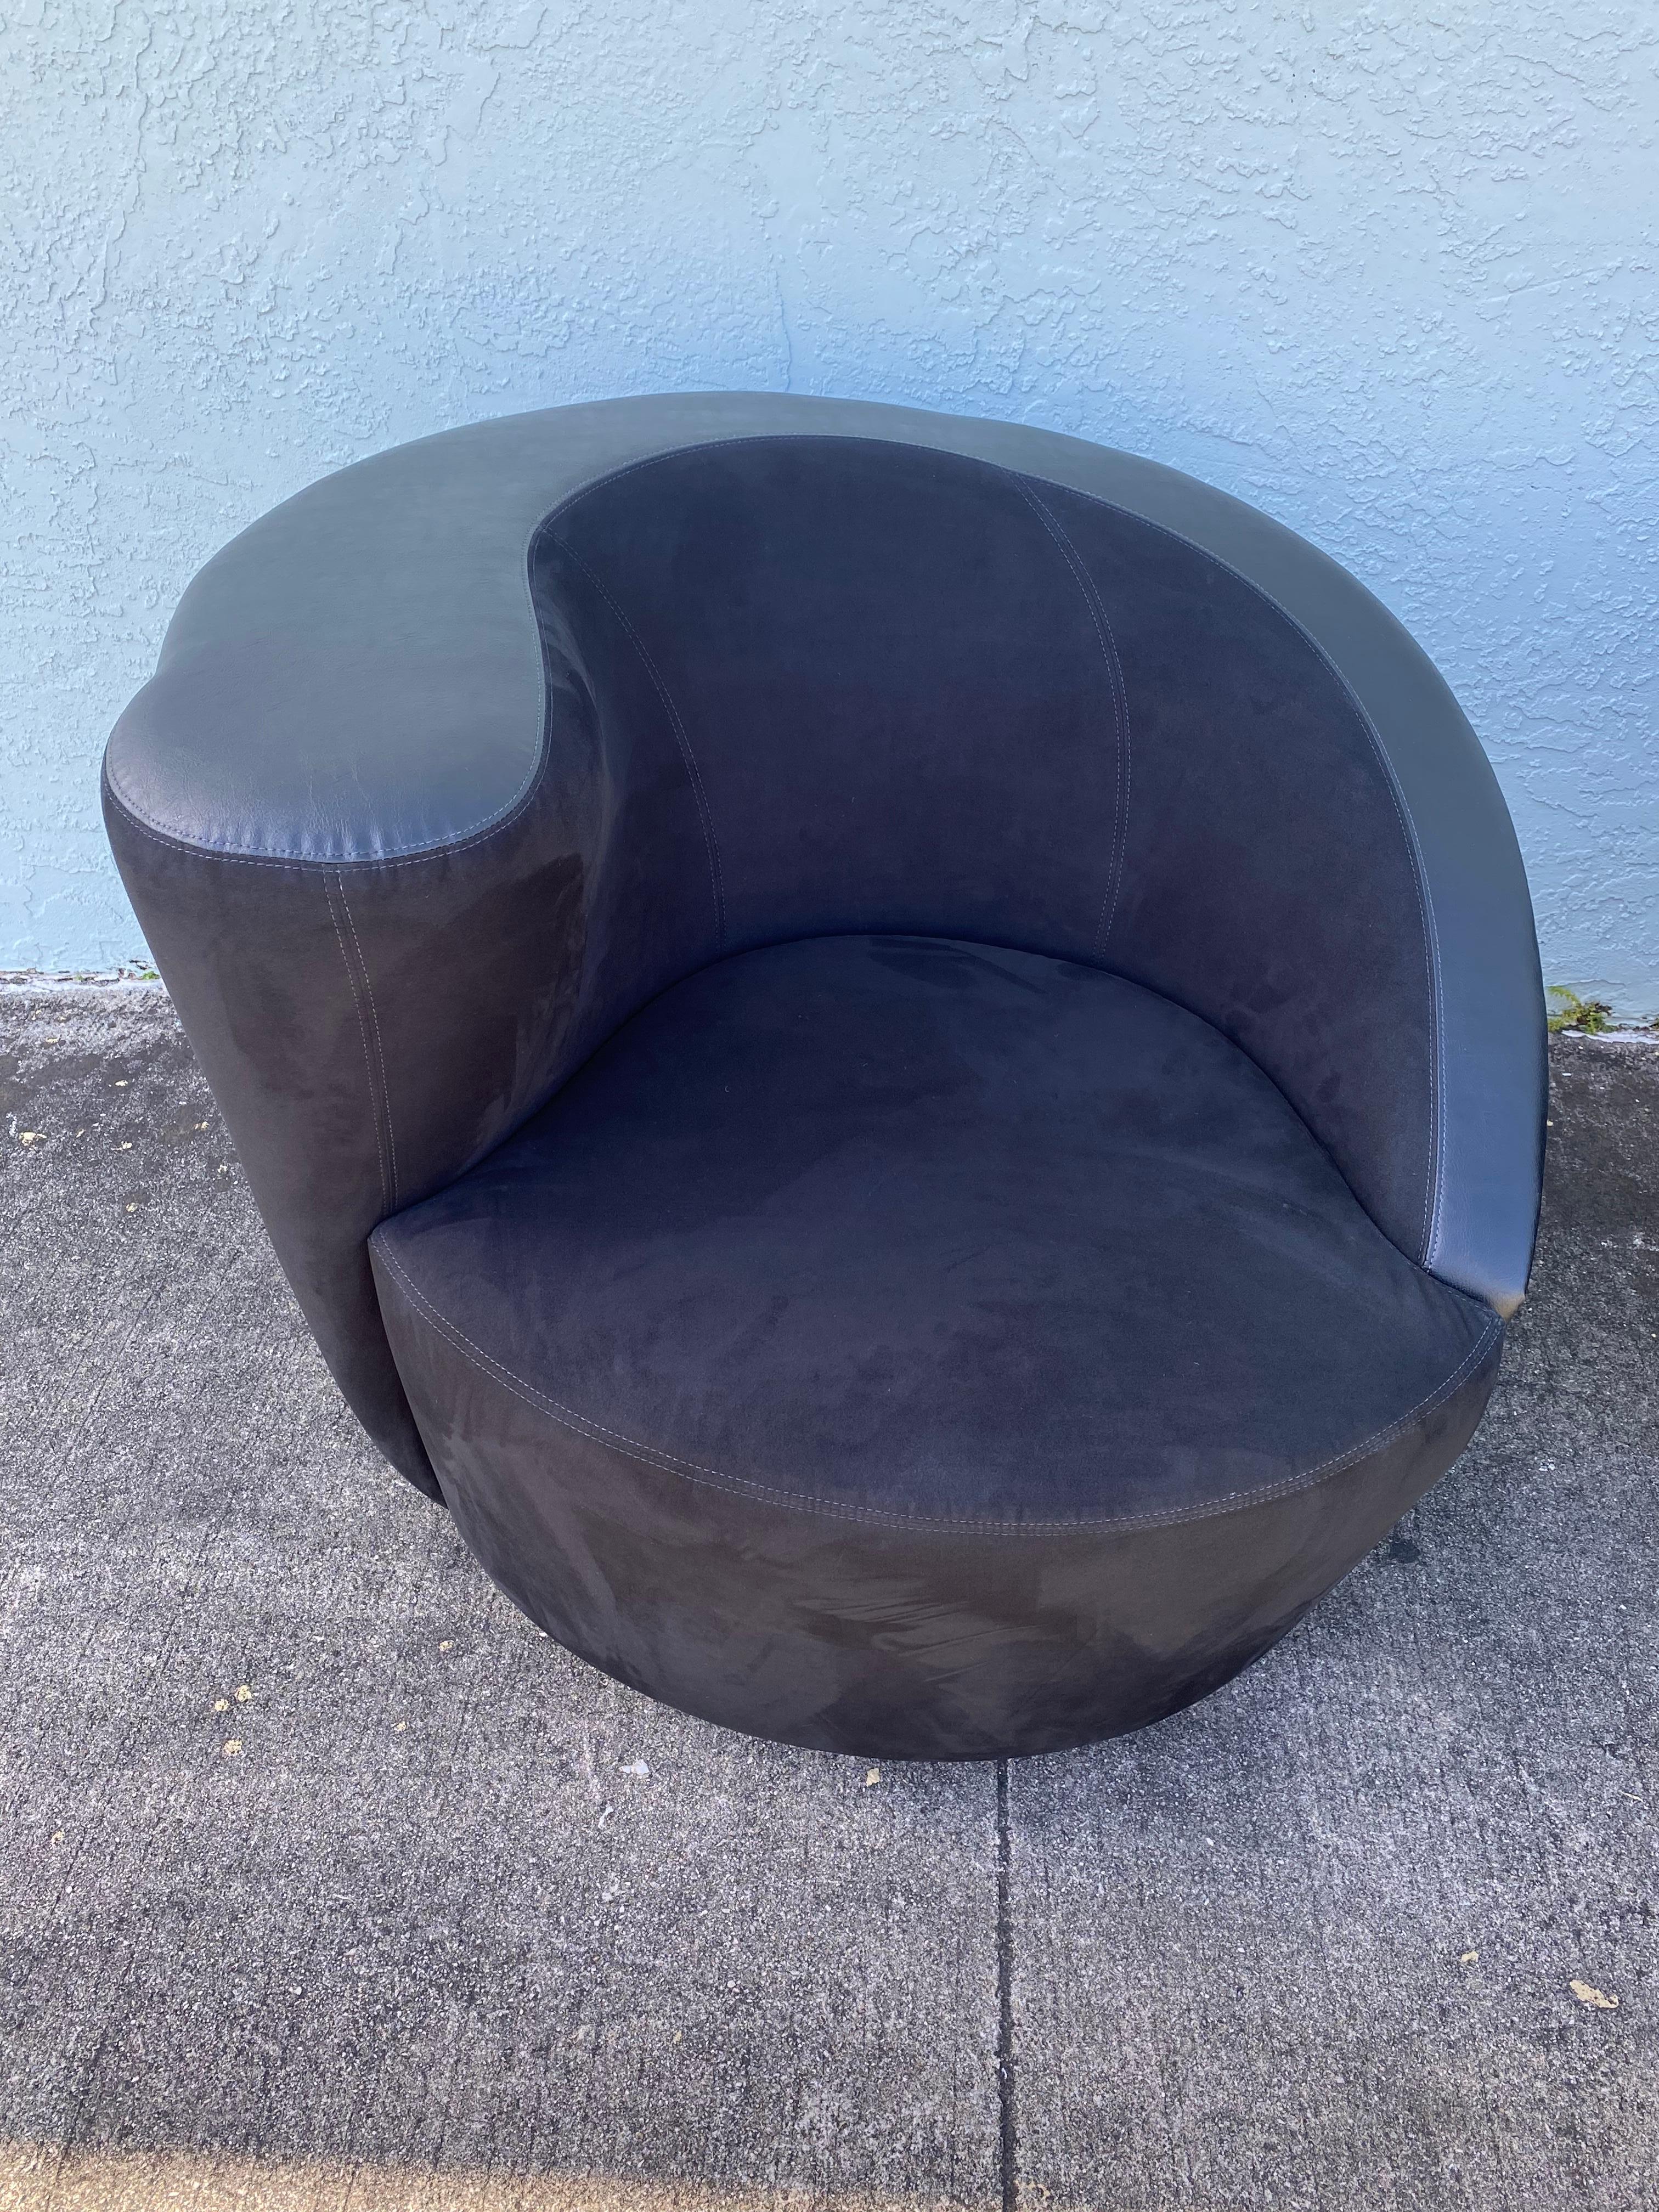 1980s Directional Kagan Black Microsuede and Leather Swivel Chairs, Set of 2 For Sale 5